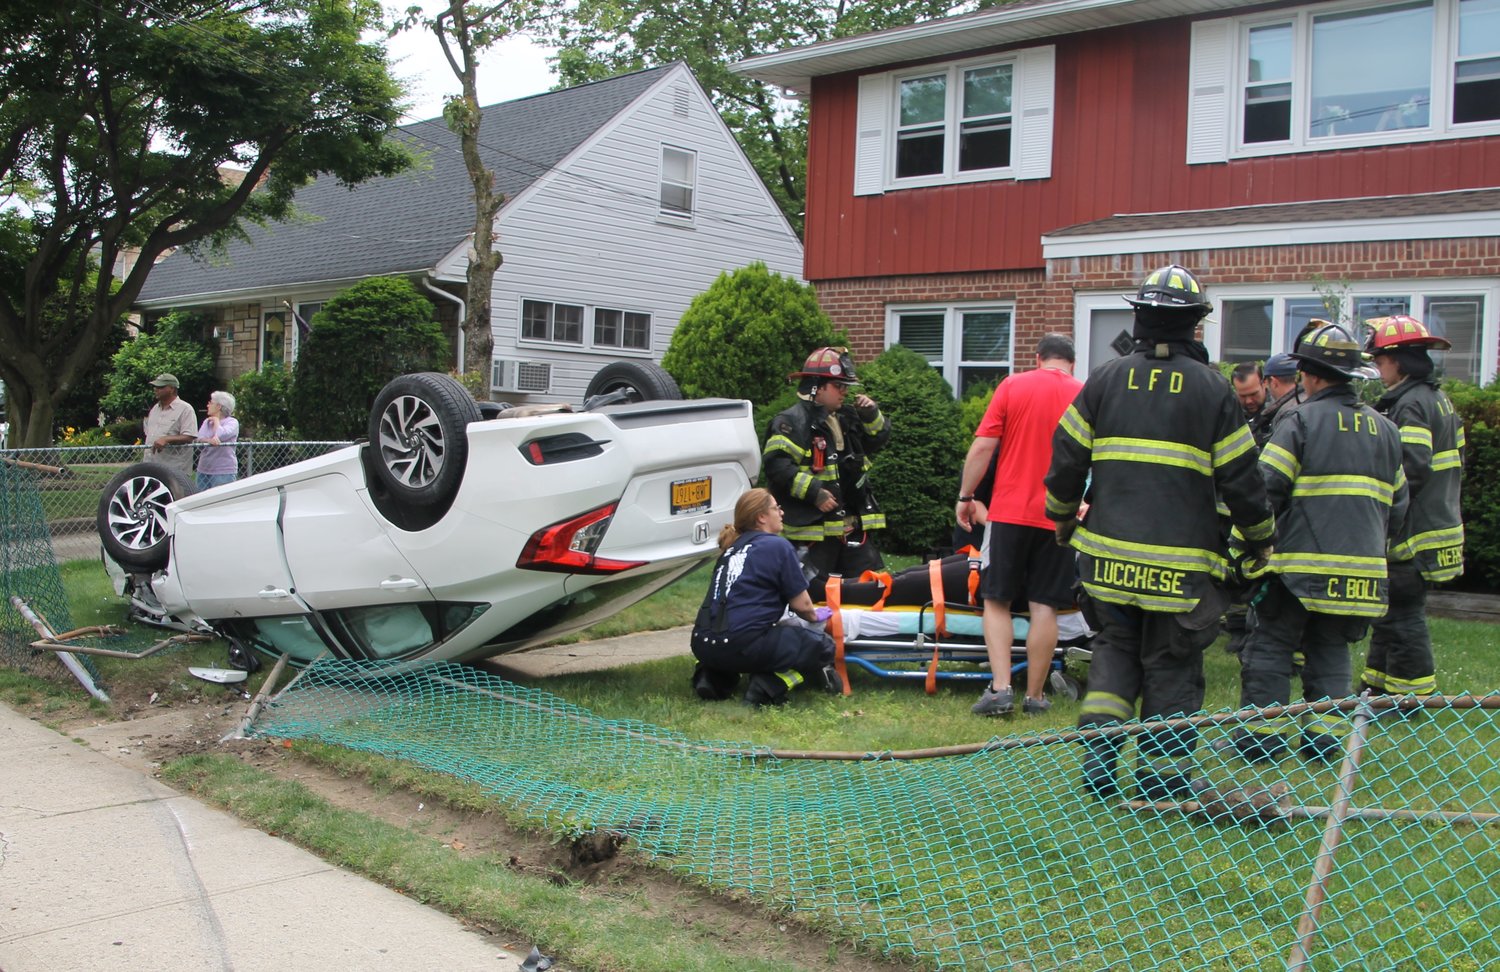 Lynbrook Emergency Medical Company members secured the driver of an overturned vehicle on a stretcher on the front lawn of a house on the corner of Ocean and Merton avenues on June 11.